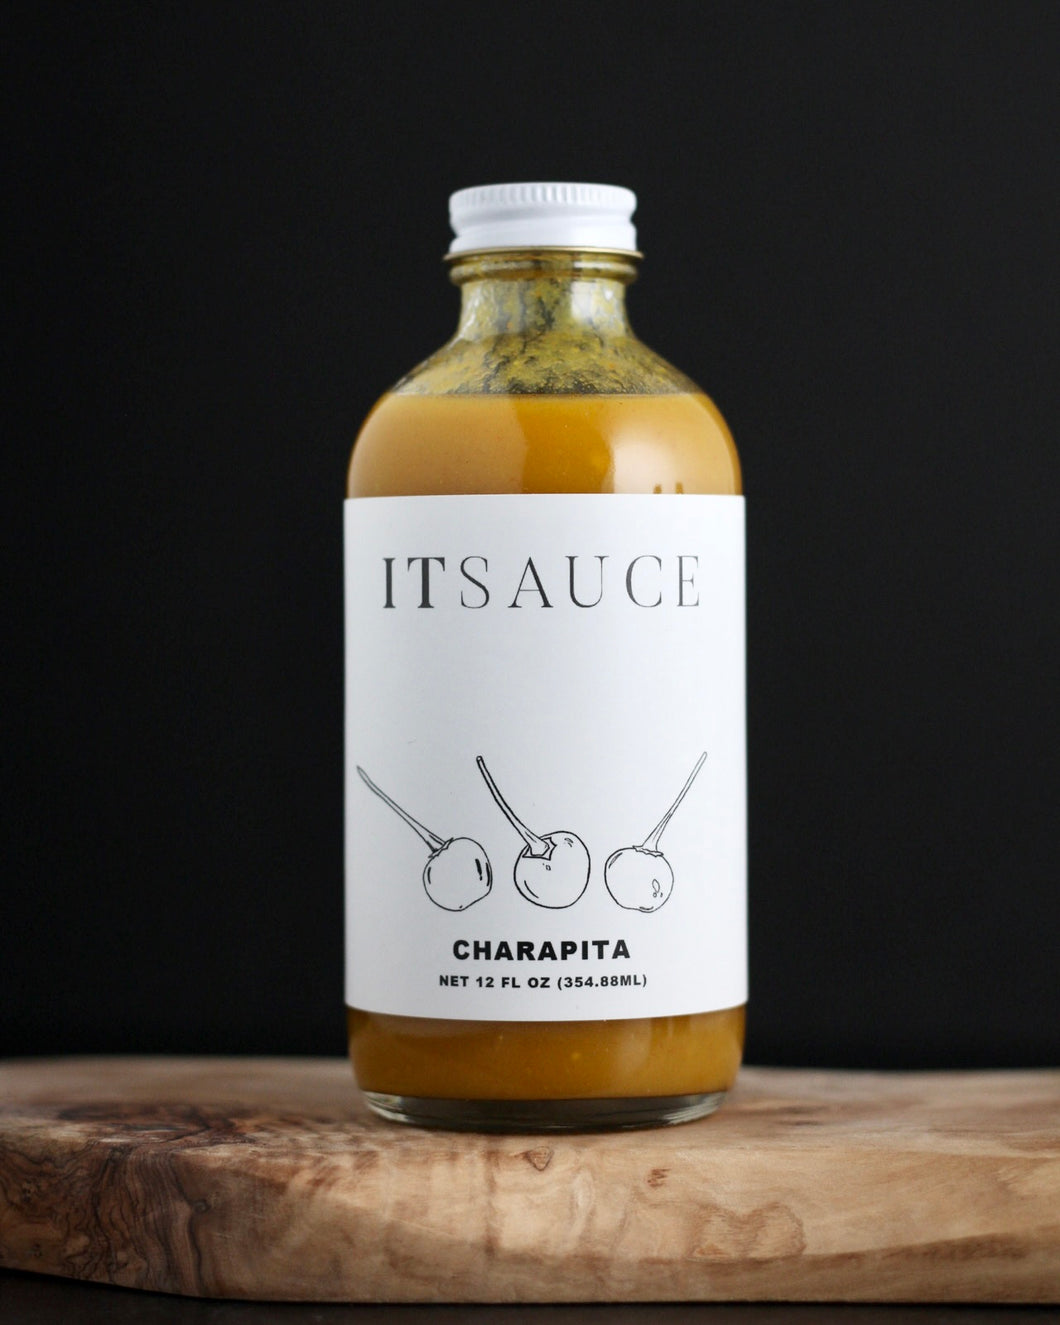 IT SAUCE Aji Charapita Hot Sauce is the spiciest of our hot sauces. A sauce for chicken, pork, vegetables, spicy margaritas or just the perfect gift for hot sauce lovers.